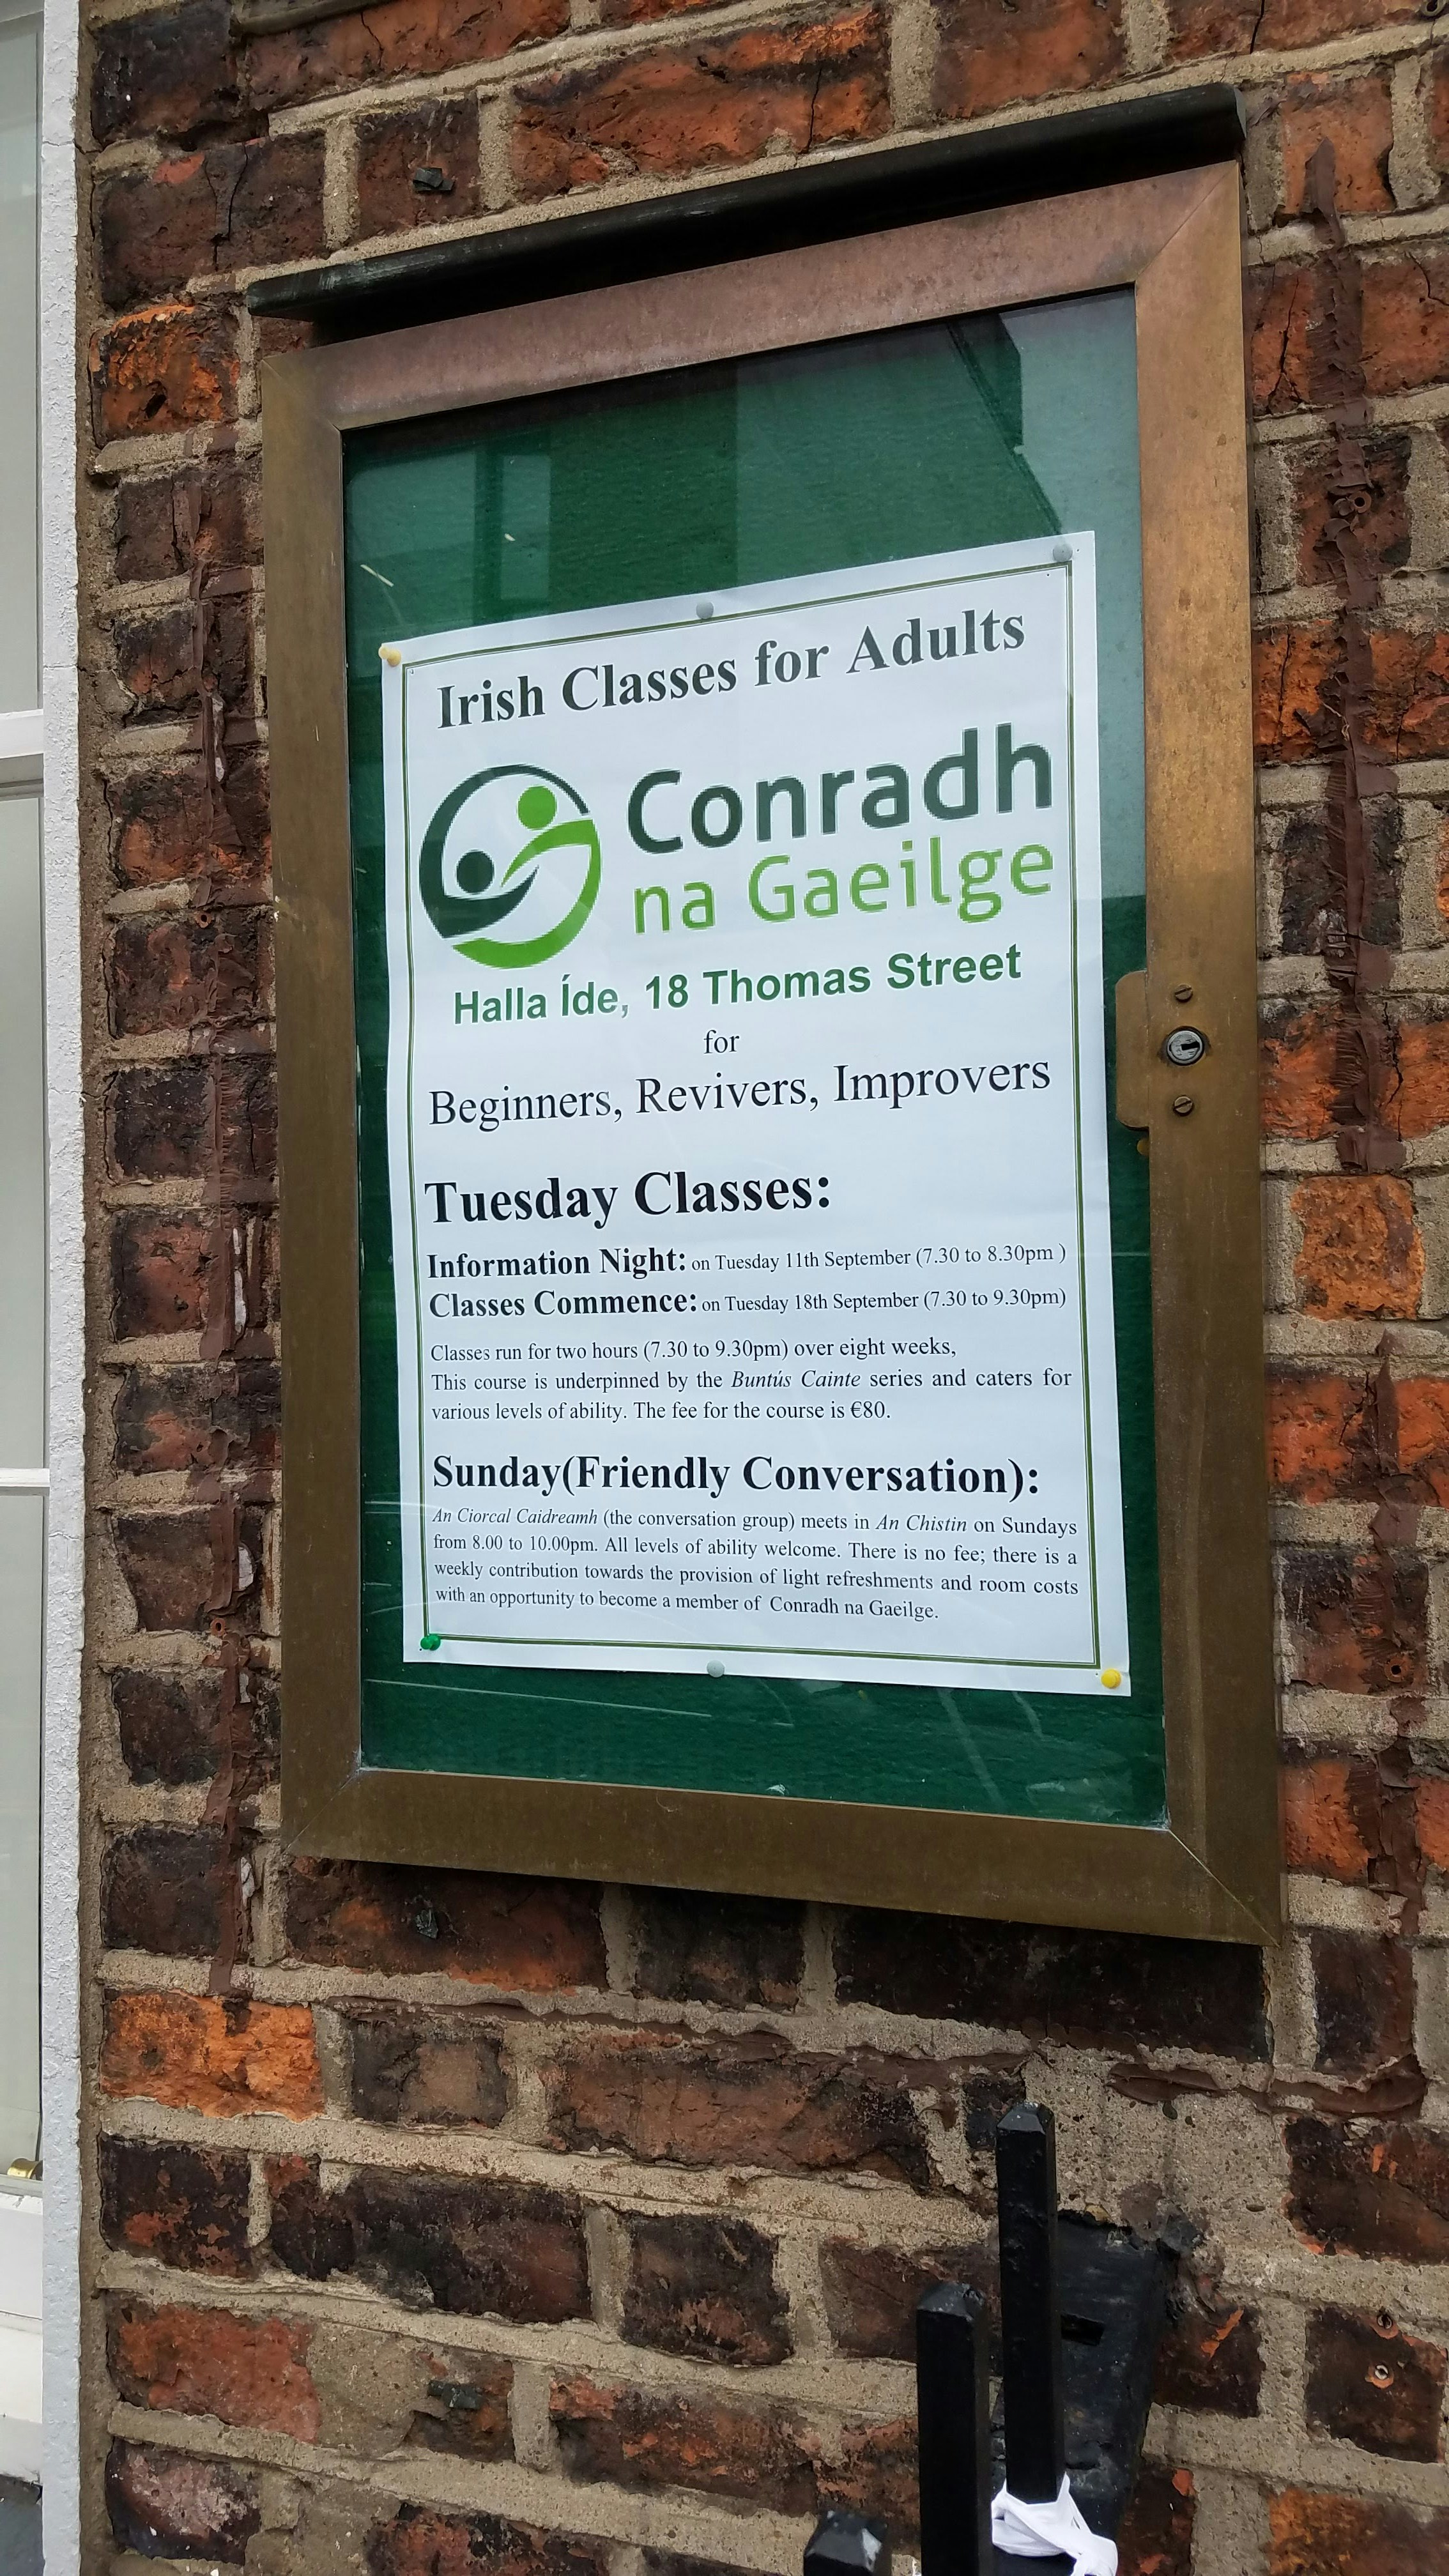 A sign advertising Conradh na Gaeilge, or Irish Classes for Adults" in Limerick hangs in a metal and glass poster box against a green background on a brick wall